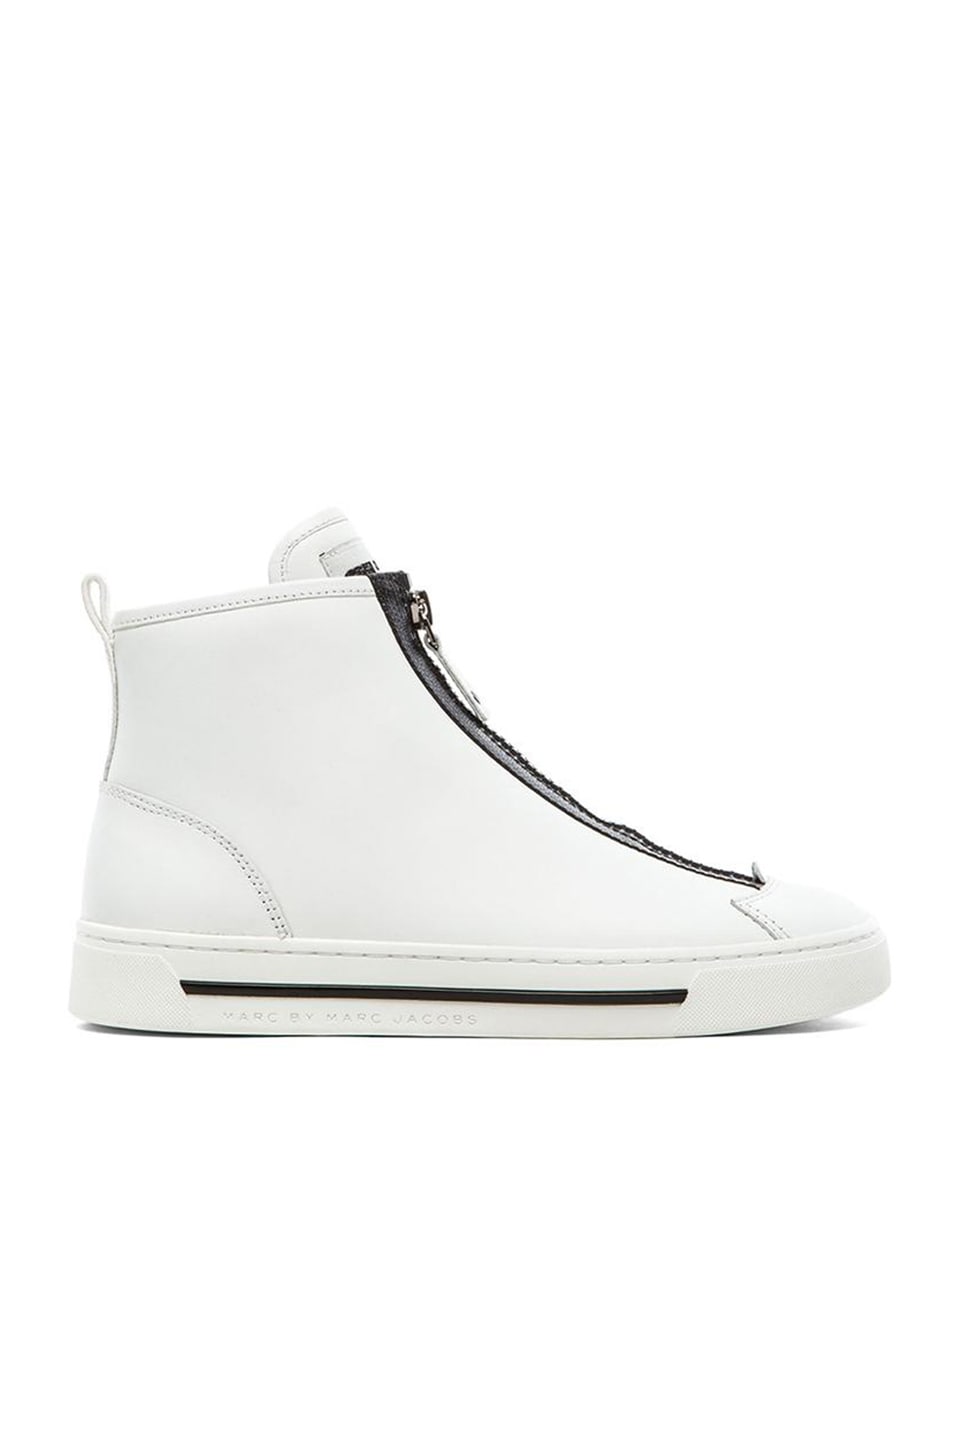 Marc by Marc Jacobs Calf Sneaker in White | REVOLVE